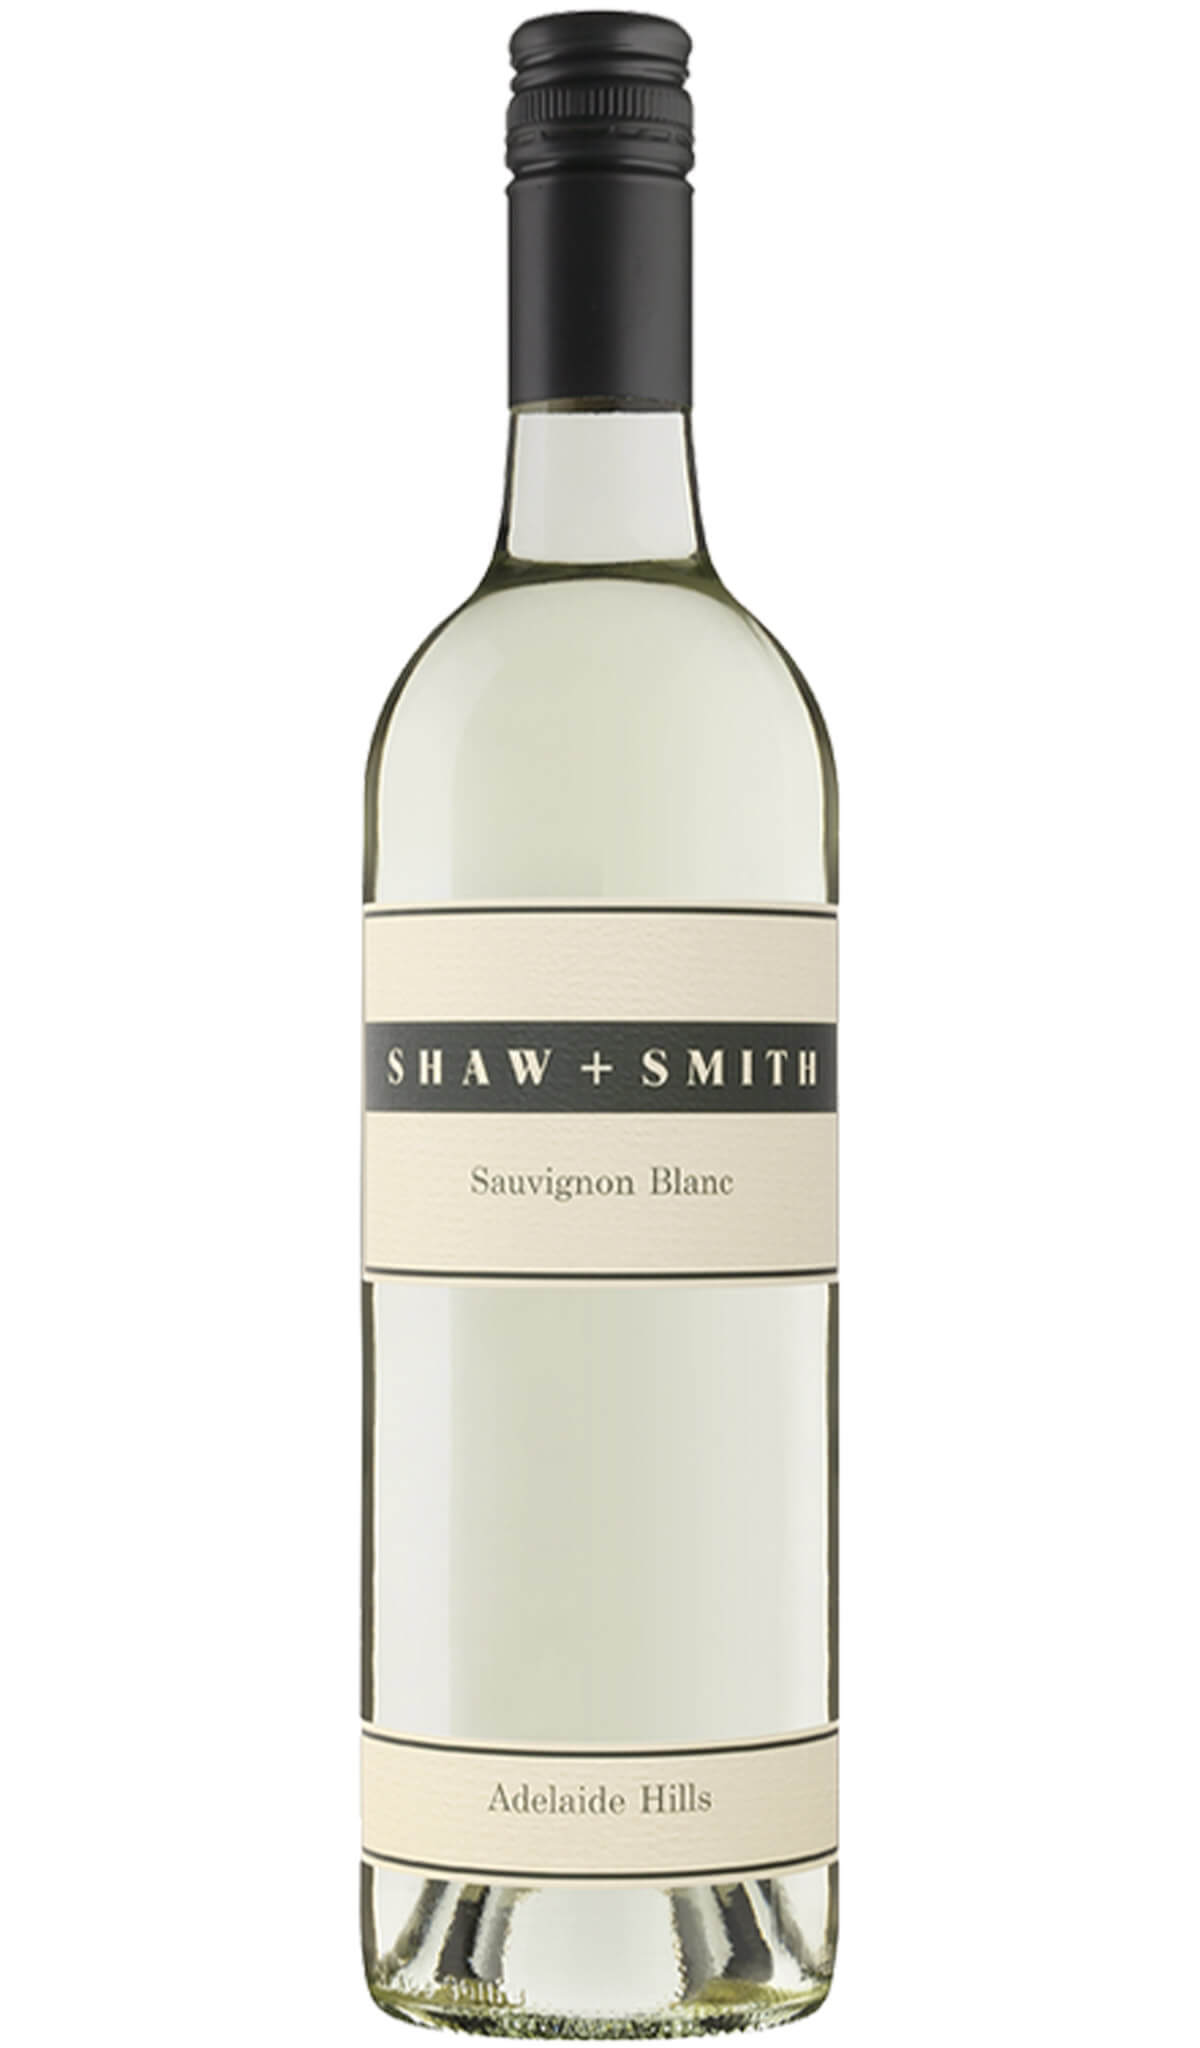 Find out more or buy Shaw + Smith Sauvignon Blanc 2023 (Adelaide Hills) online at Wine Sellers Direct - Australia’s independent liquor specialists.